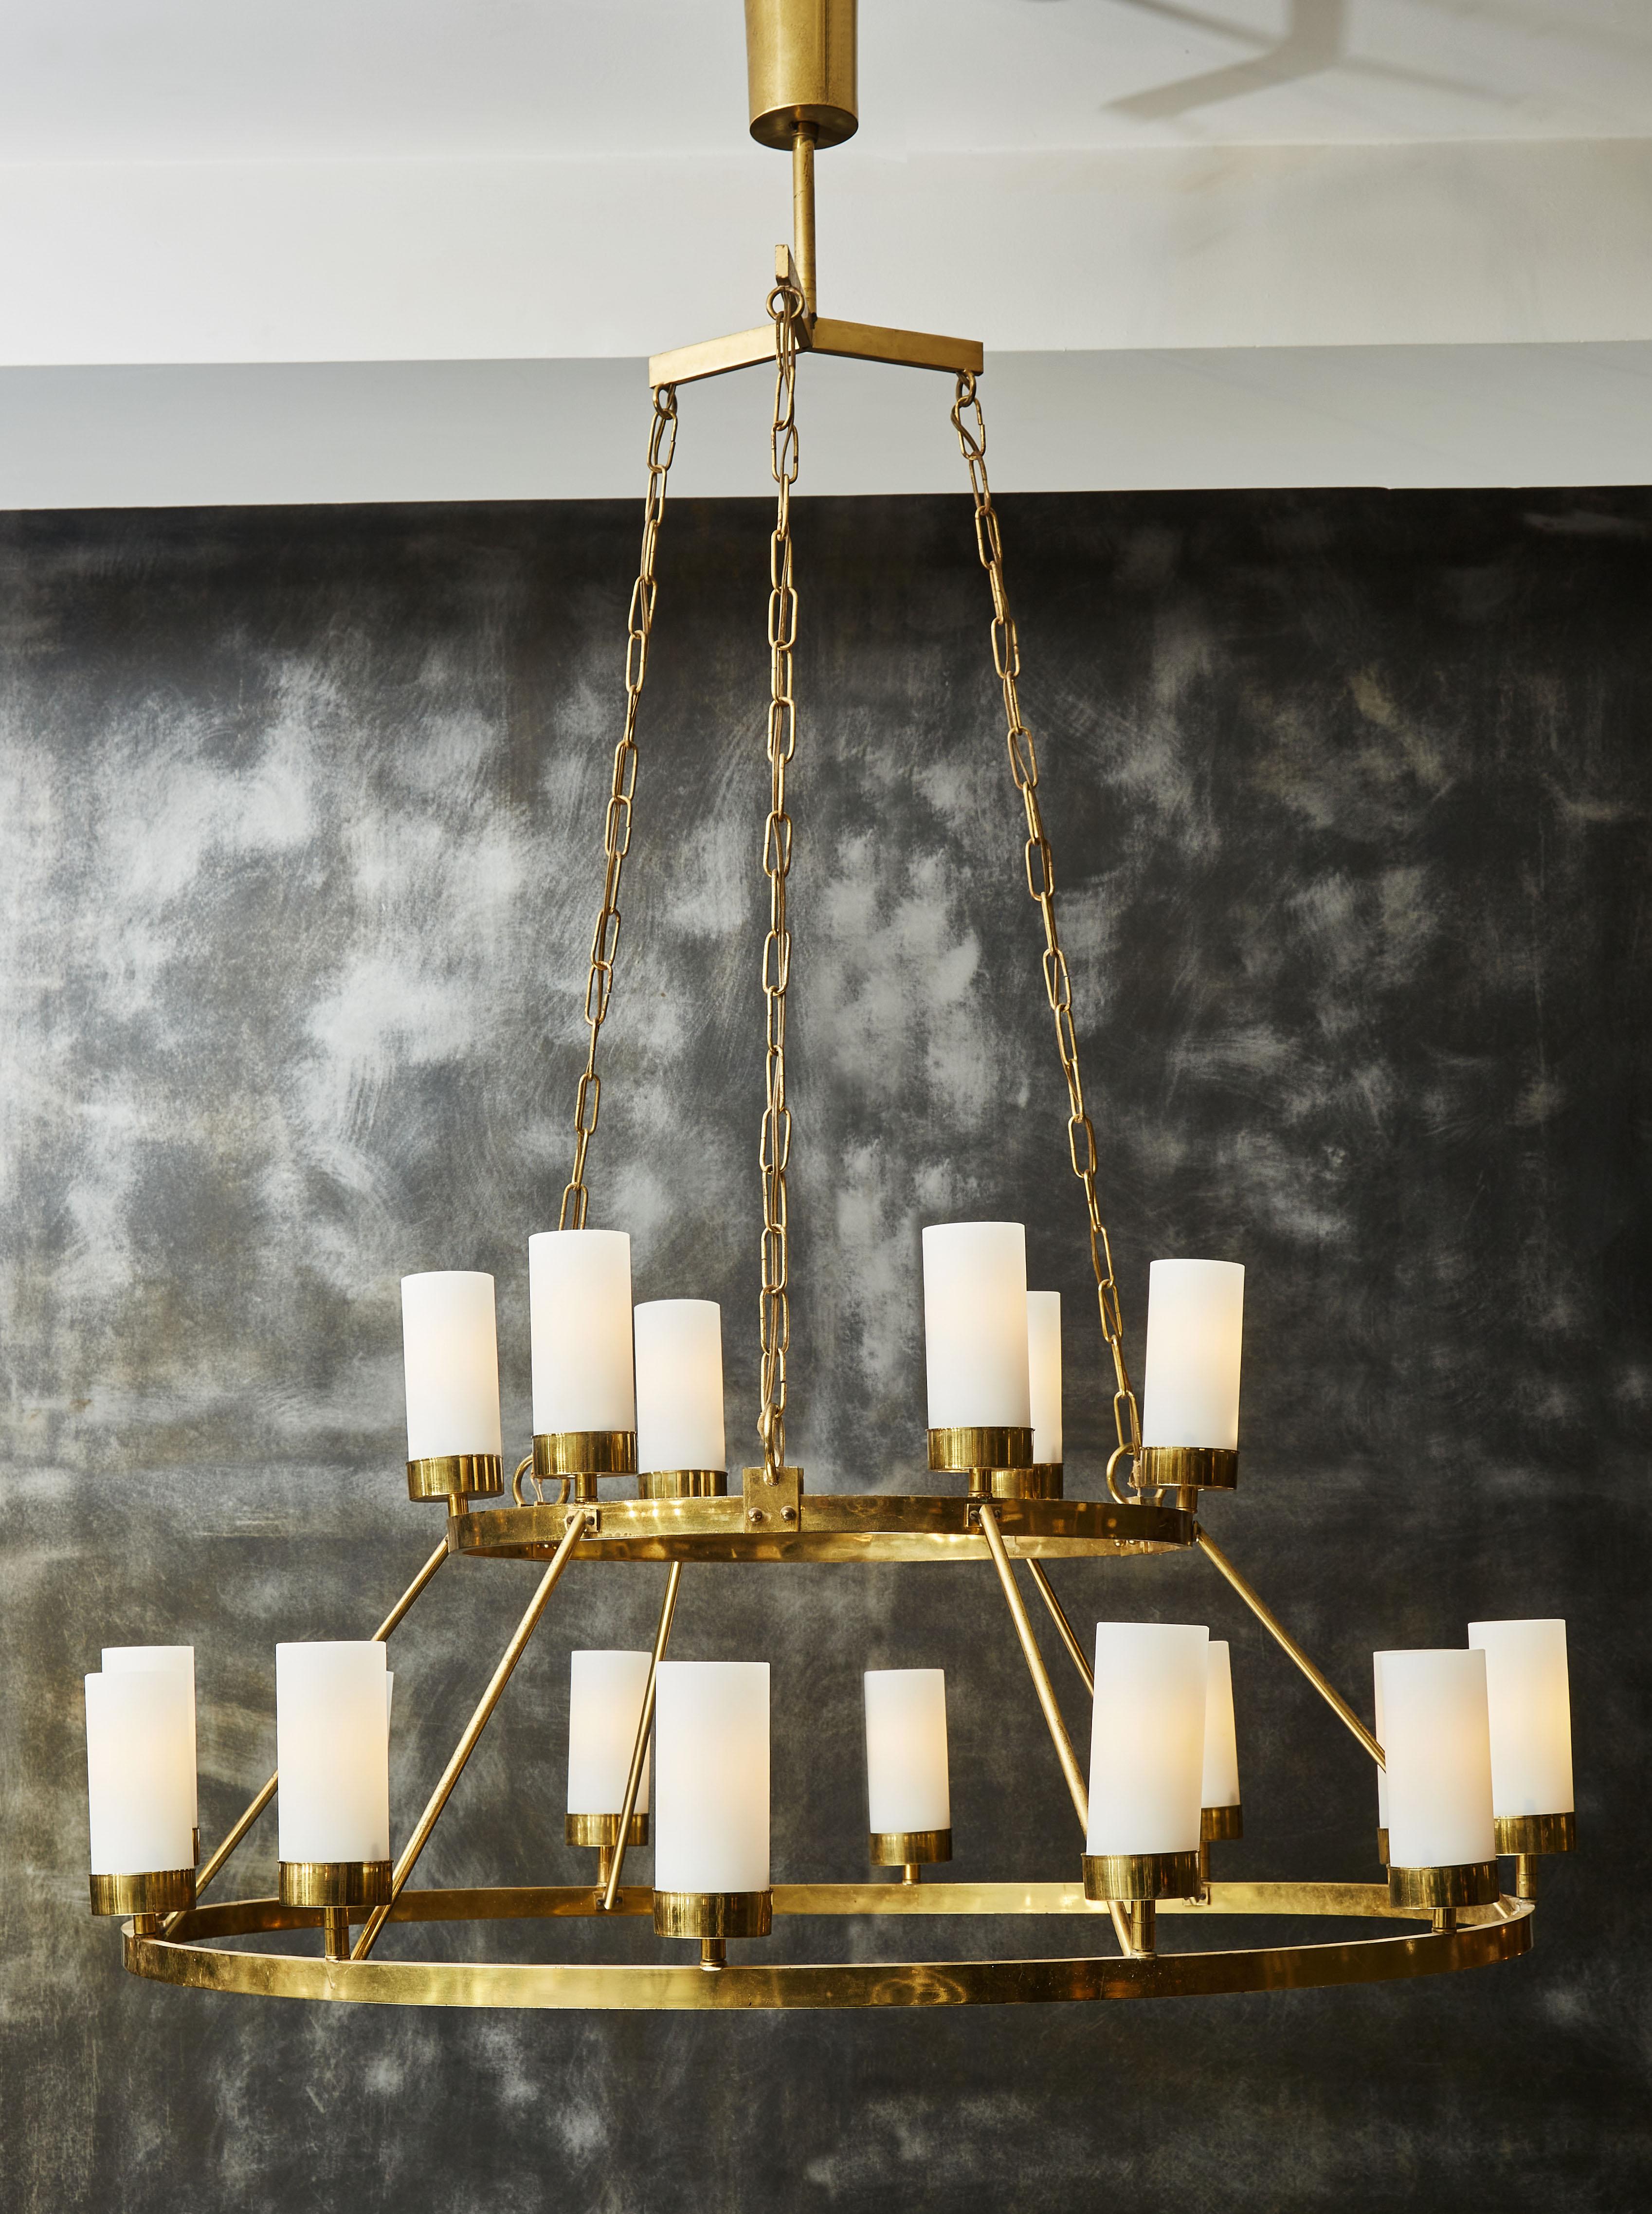 1960s Italian chandelier made of two brass hoops hanged by chains, on which are eighteen lights inside opaline tubes.

Chains can be shortened.